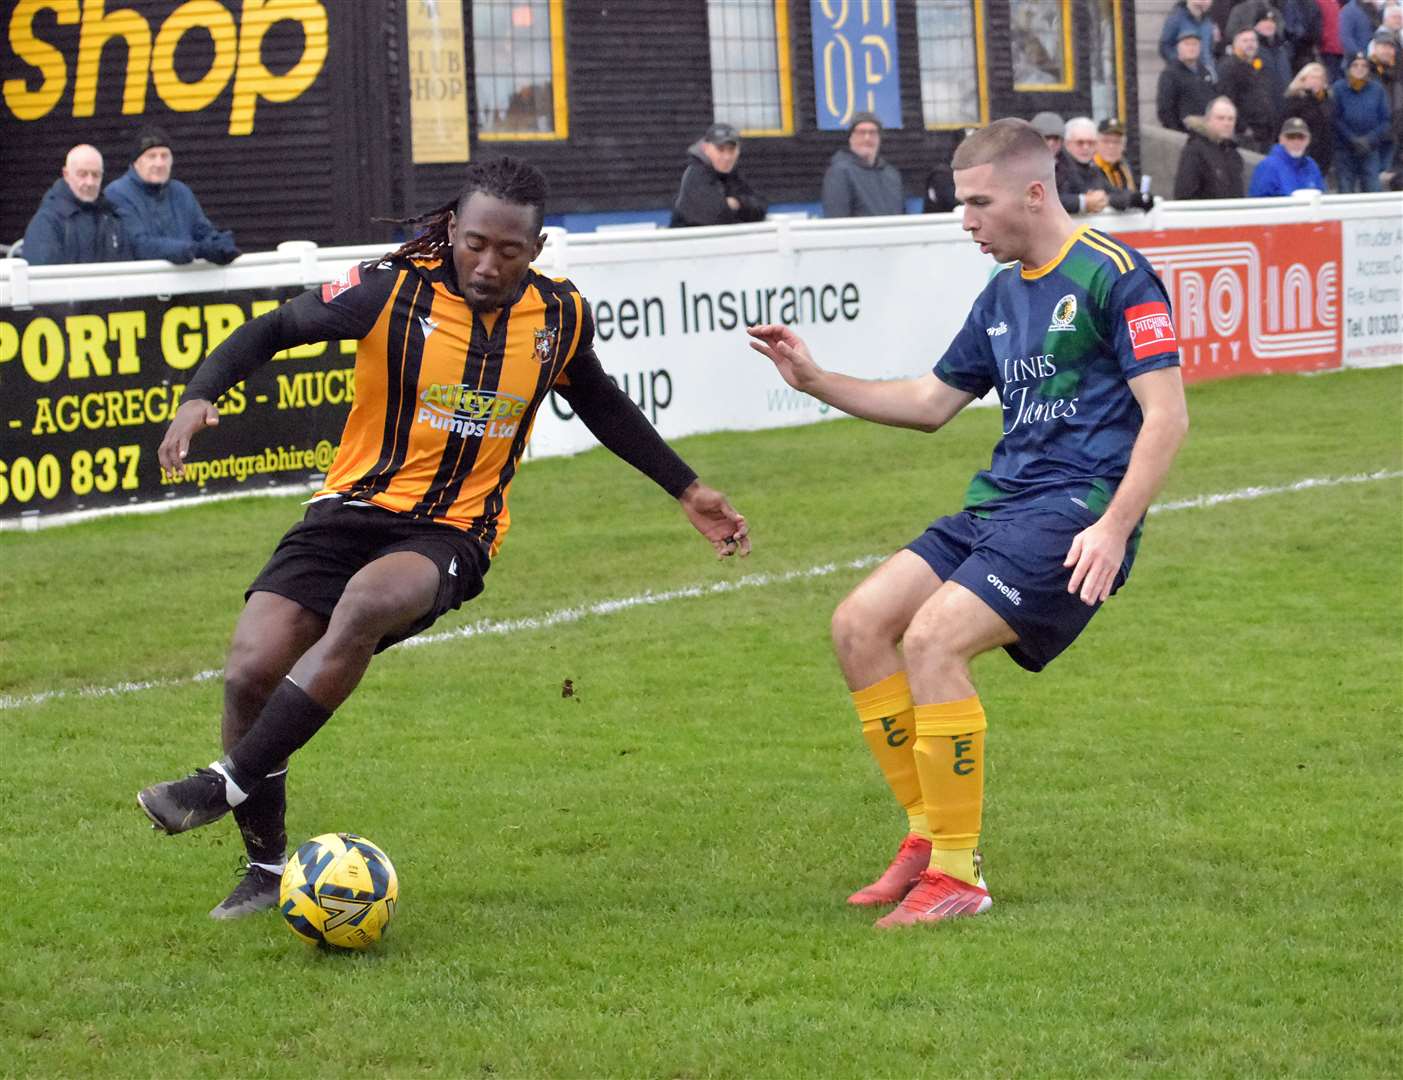 Match action between Folkestone Invicta and Horsham Picture: Randolph File